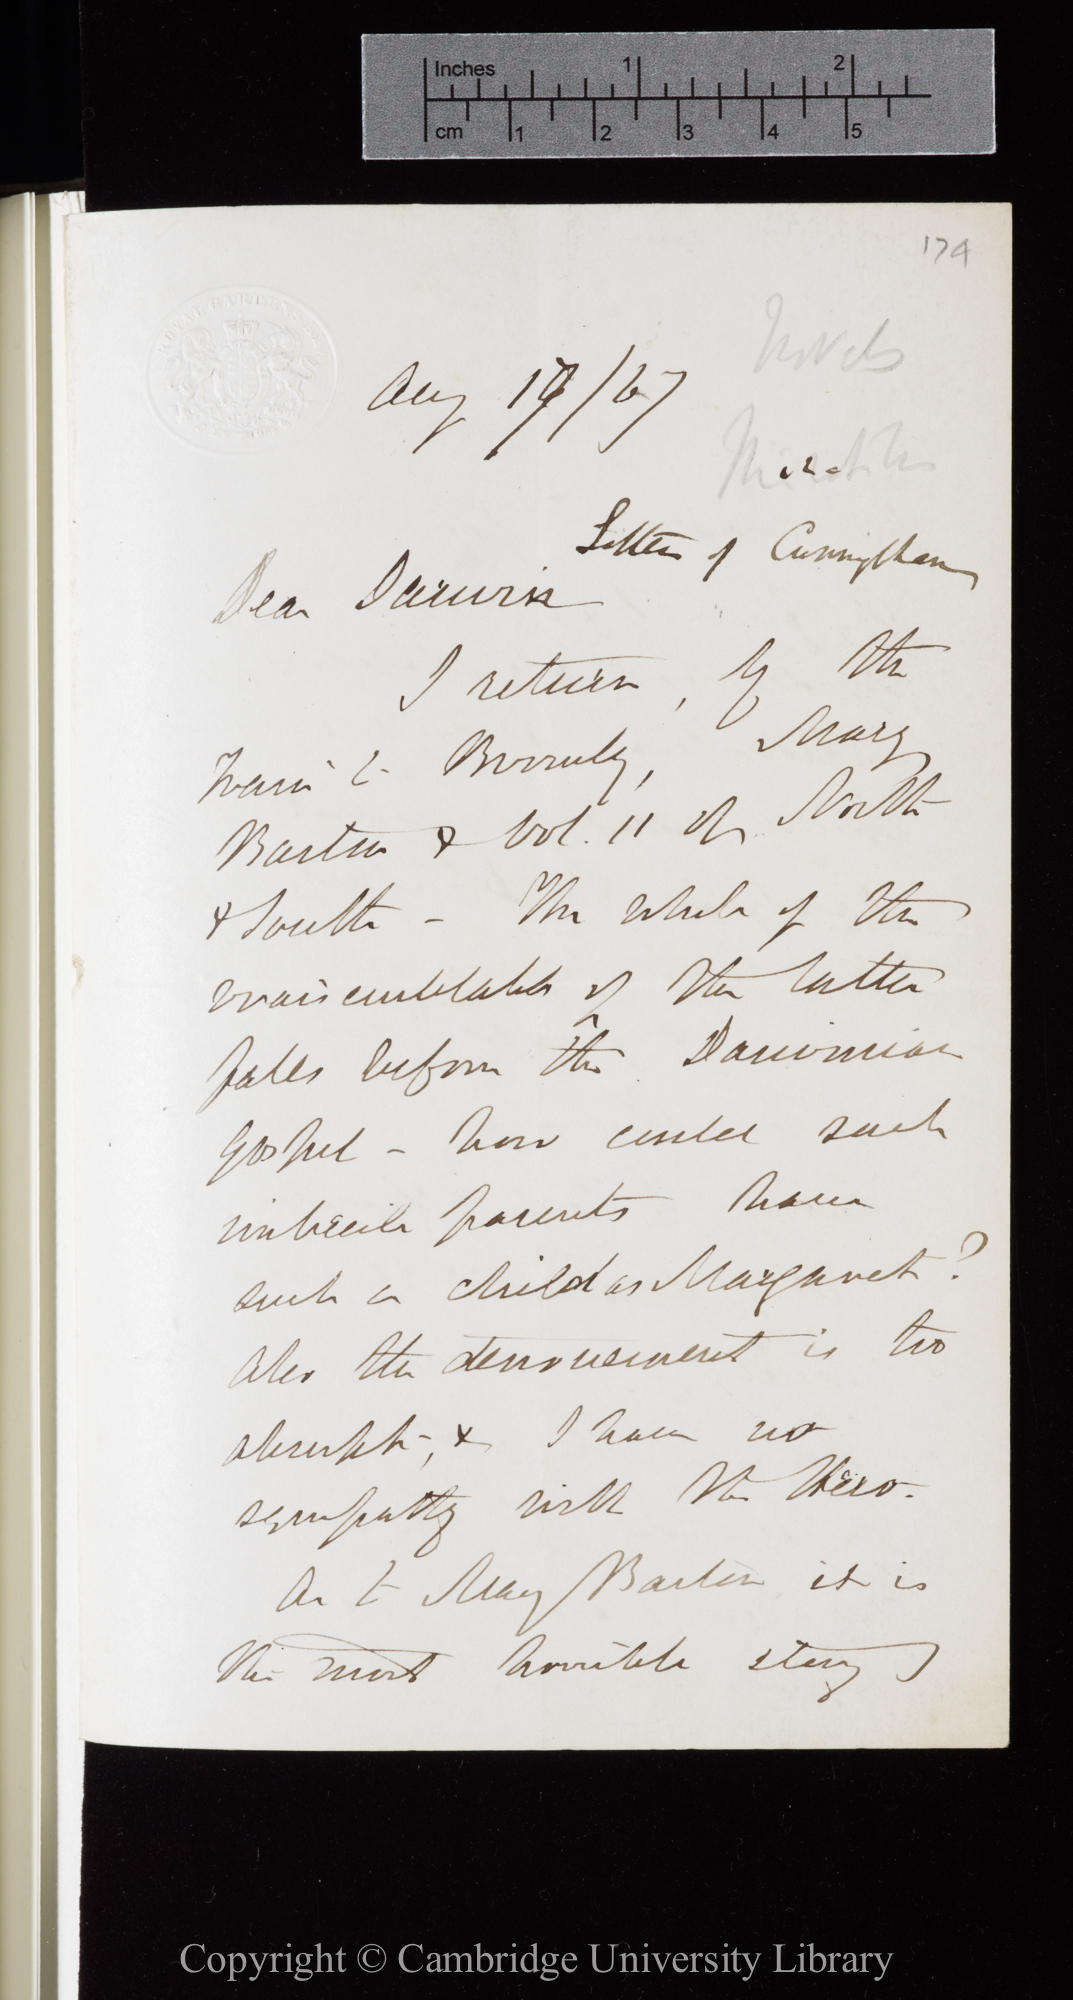 Letter from J. D. Hooker to C. R. Darwin   17 August 1867